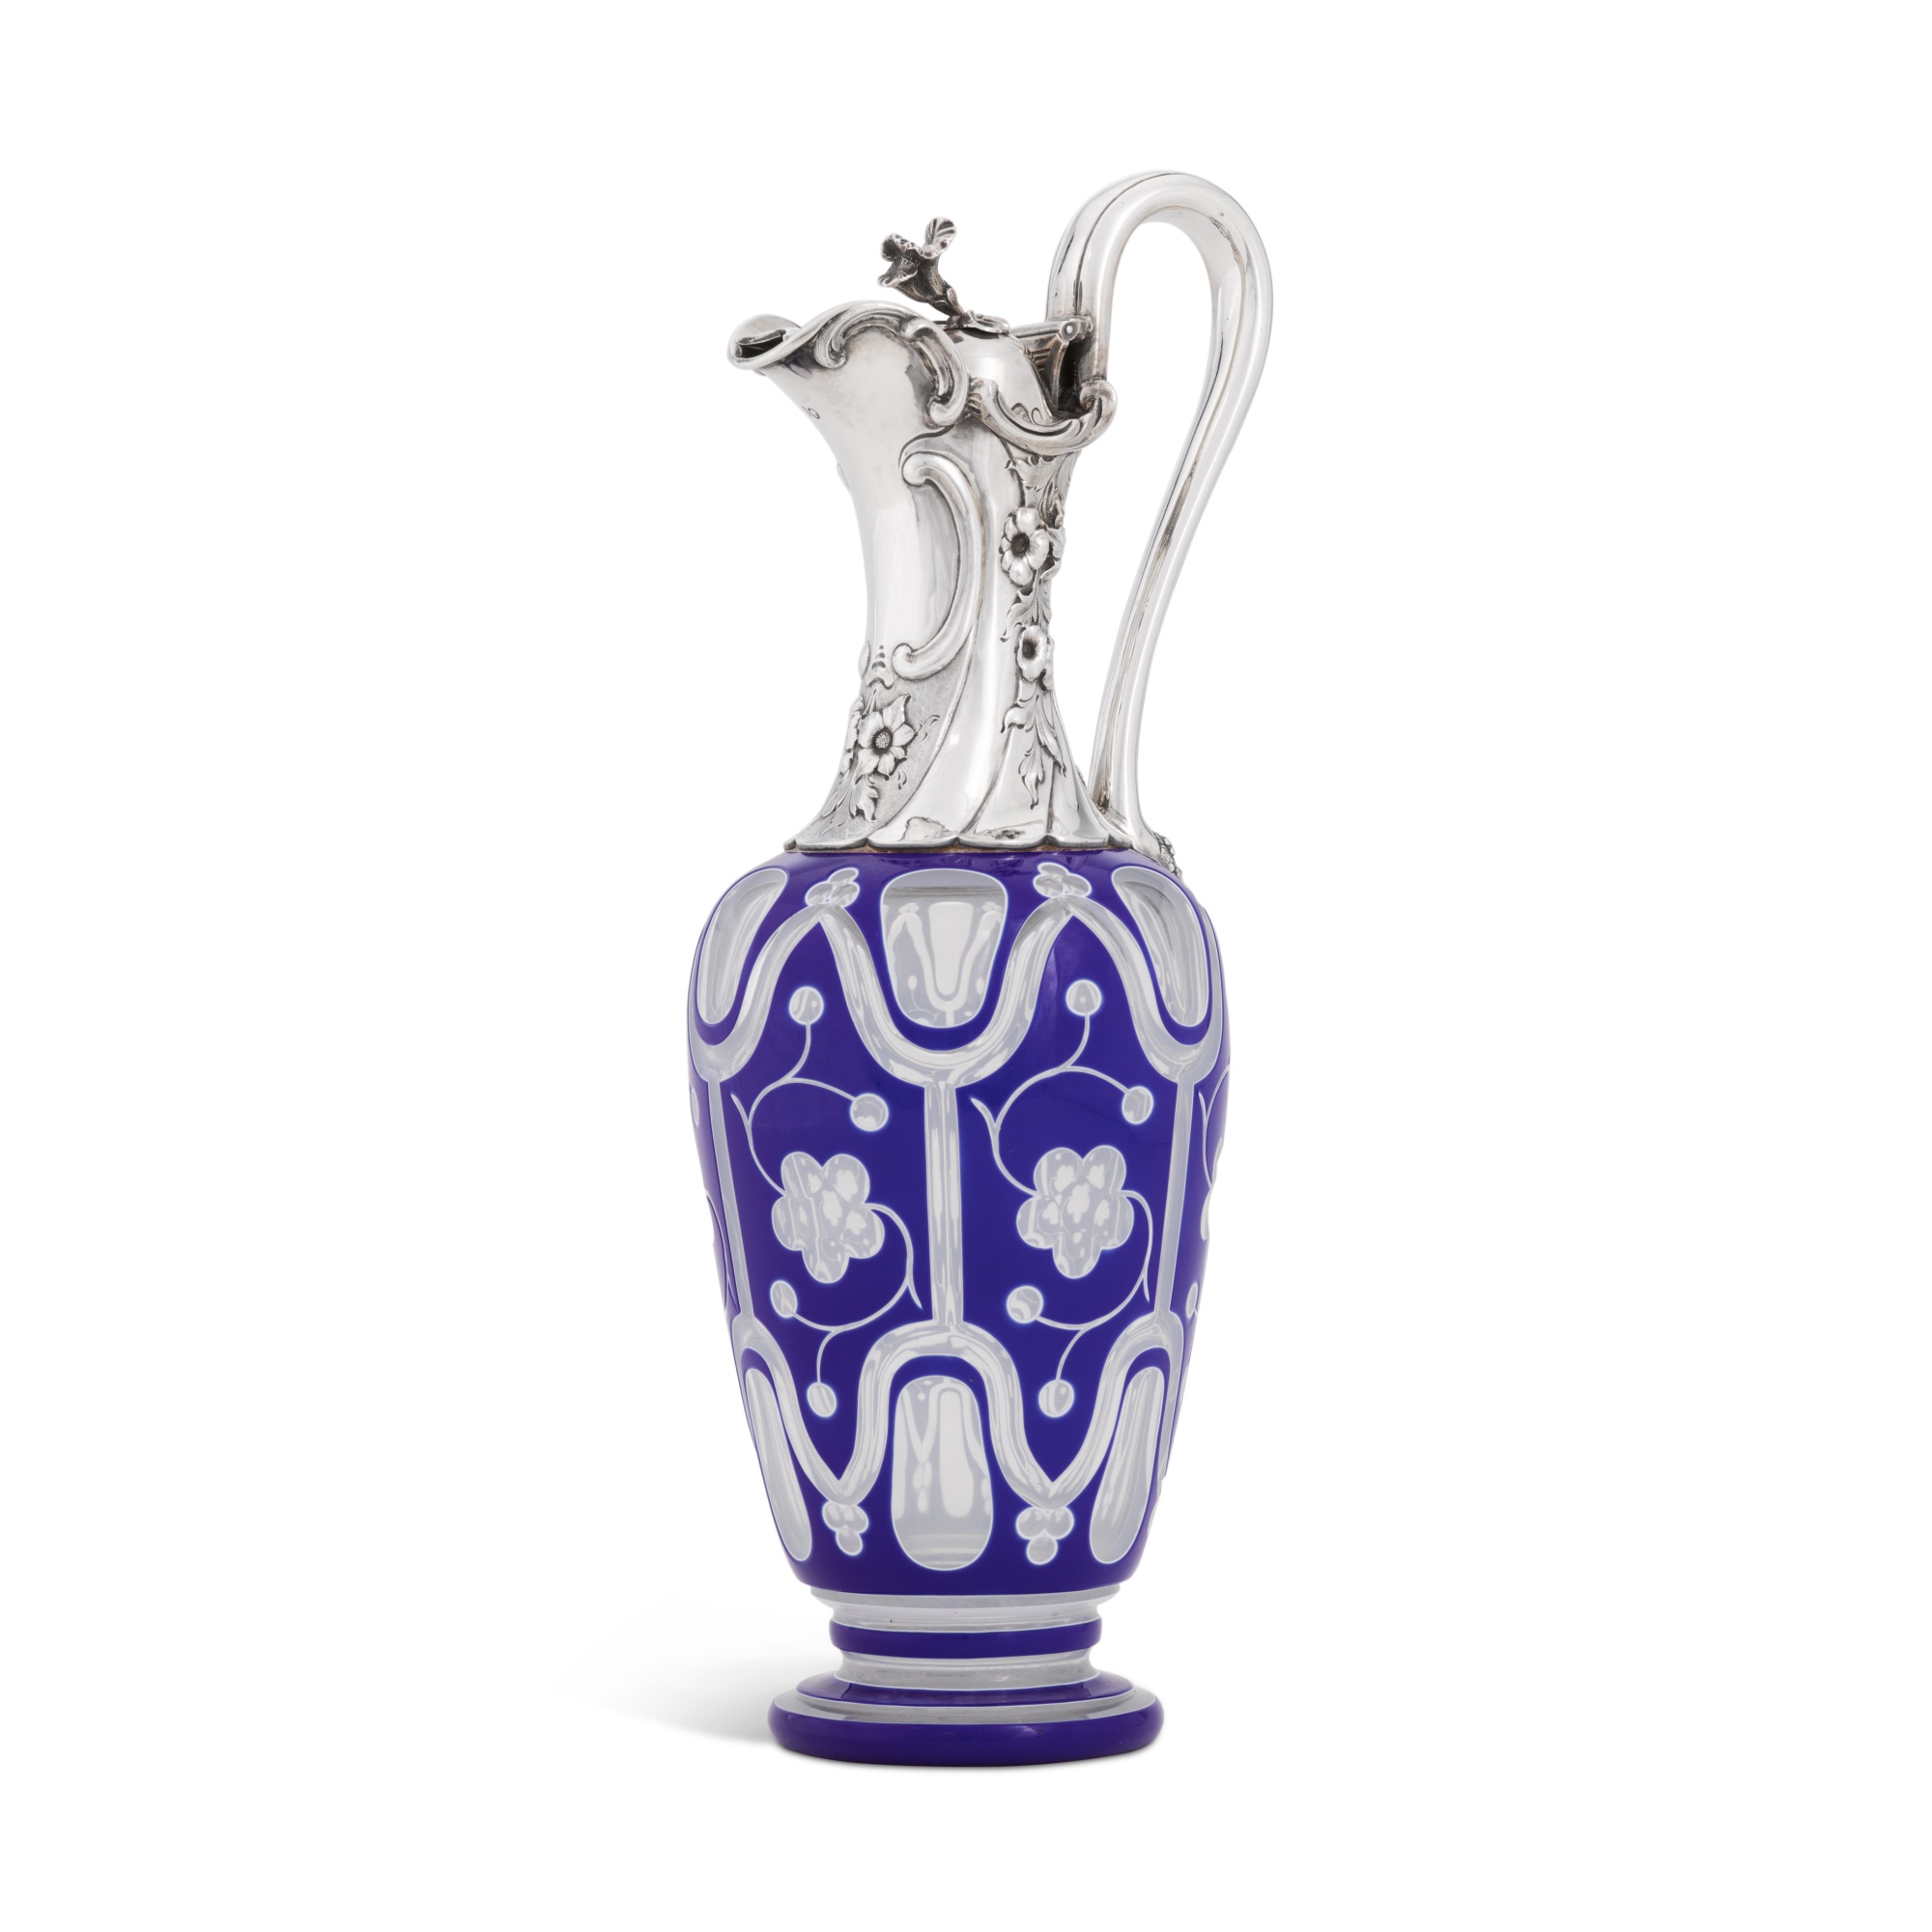 A Victorian silver-mounted glass claret jug, Charles Reily & George Storer, London, 1845 - Image 3 of 5